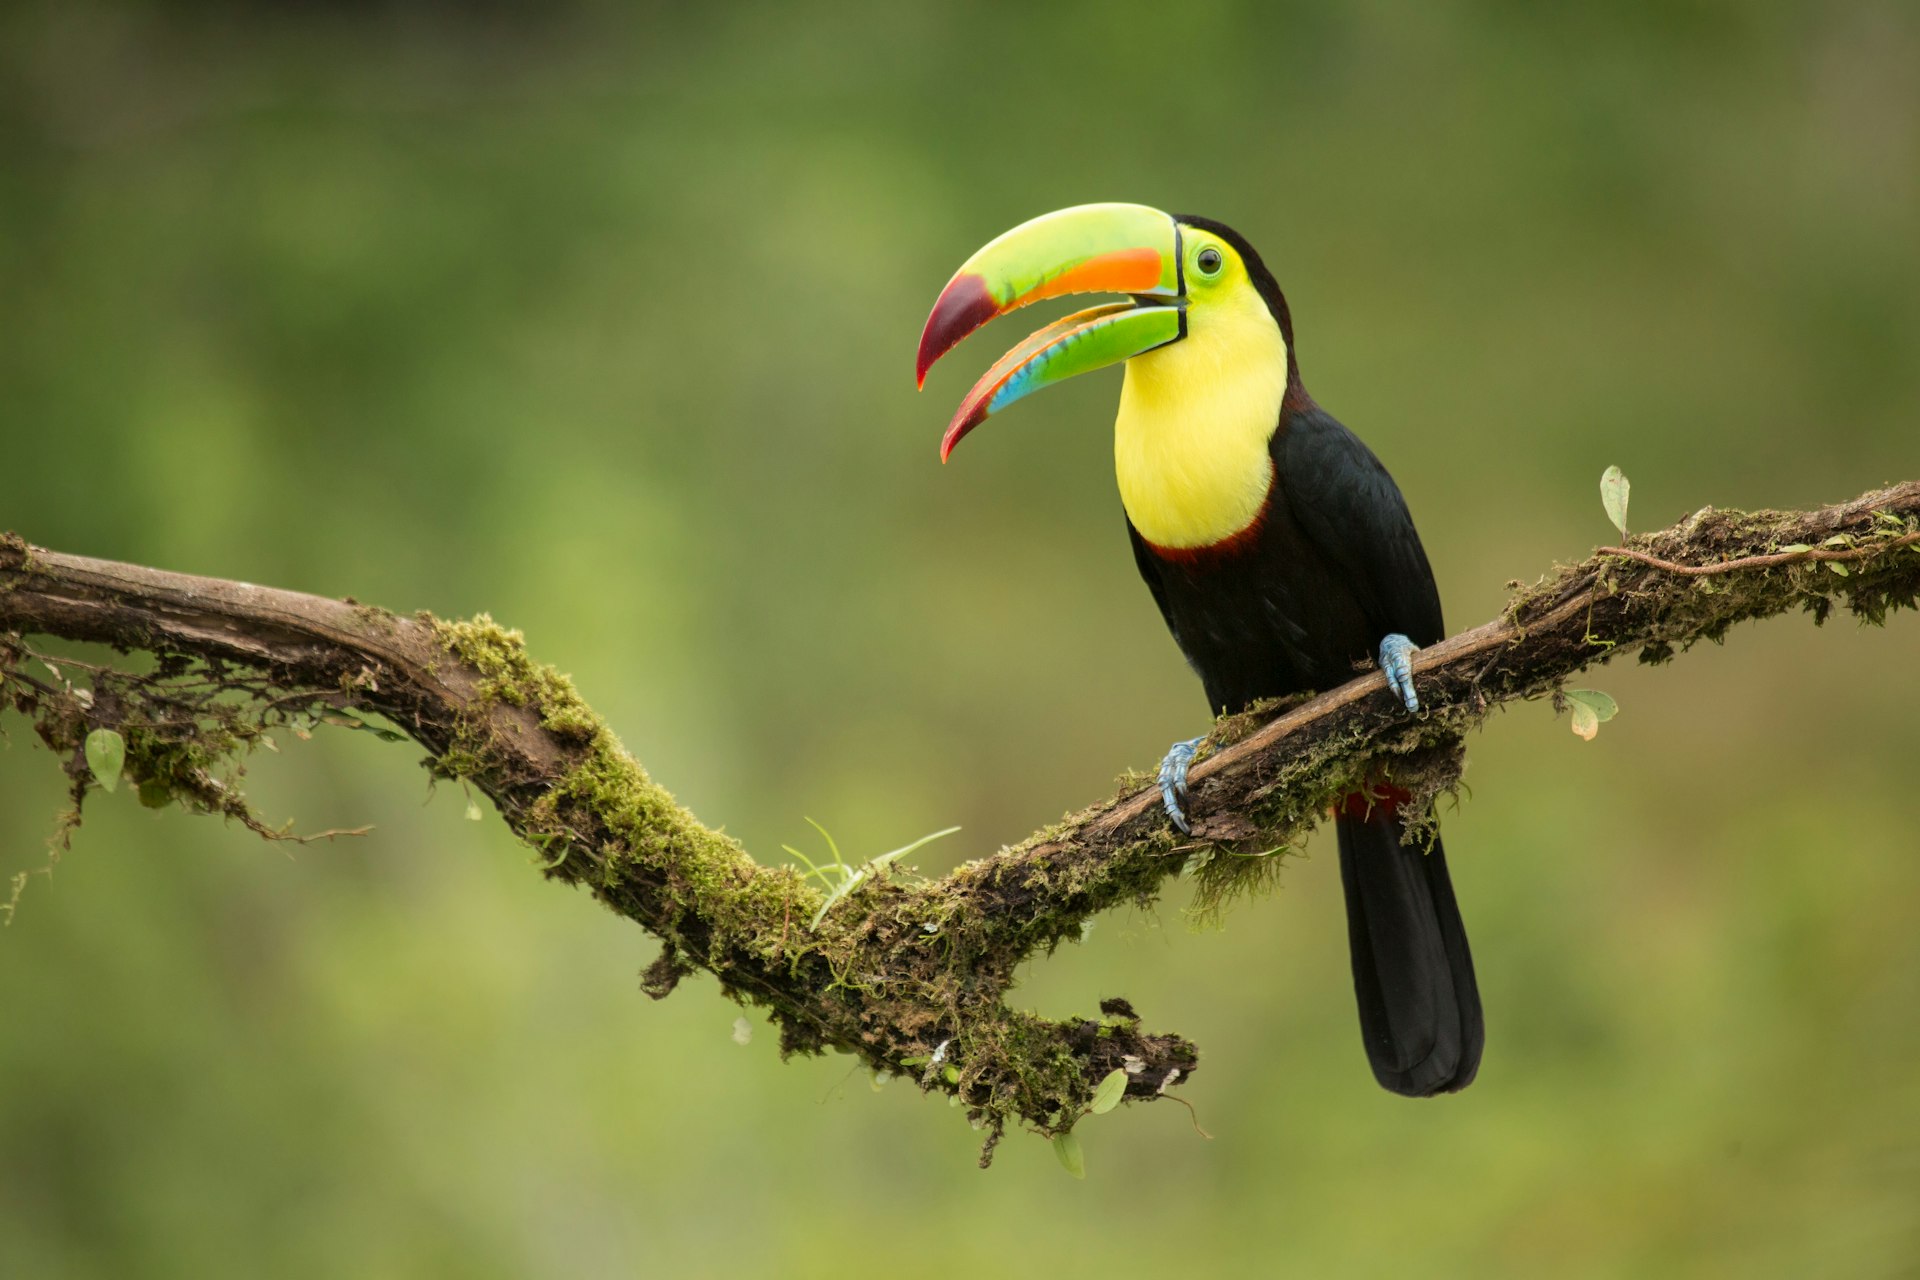 500px Photo ID: 64248687 - Keel-billed Toucan (Ramphastos sulfuratus) perched on a branch calling at the low lands of Costa Rica